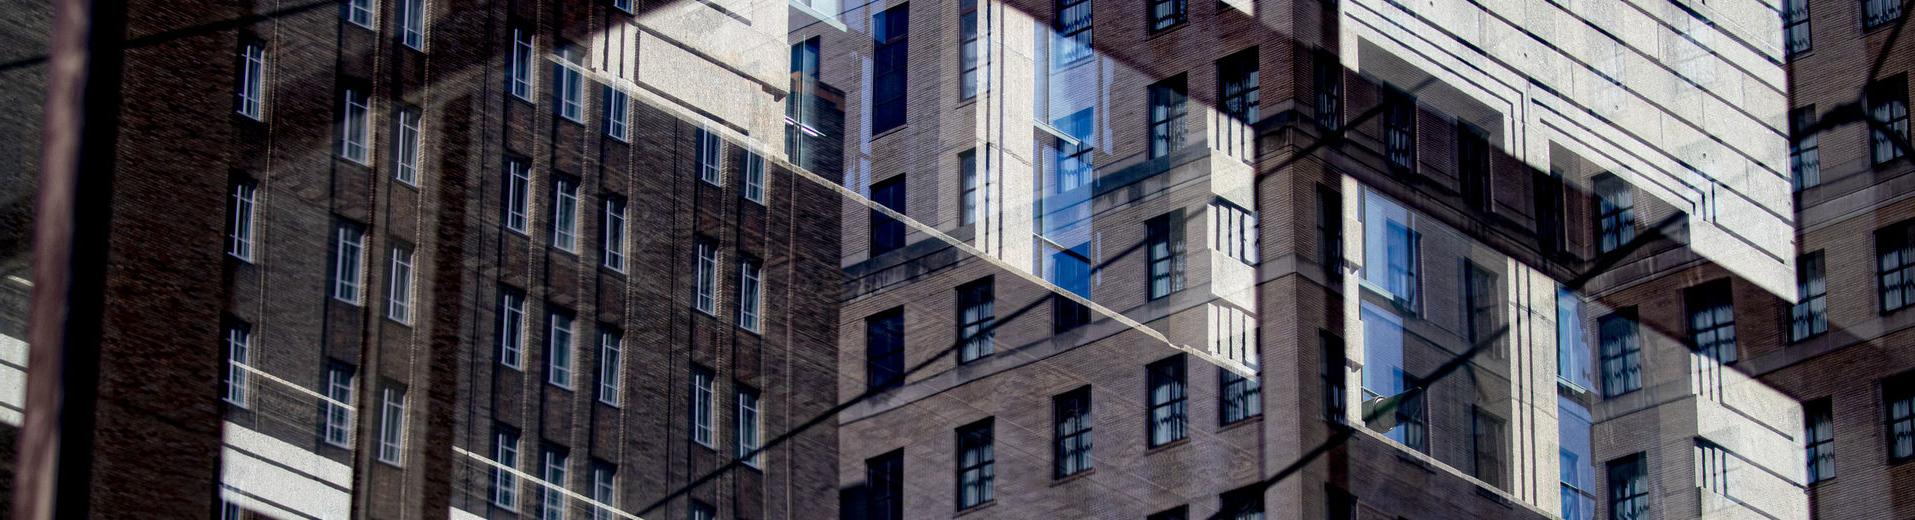 abstract image of buildings in Center City. 